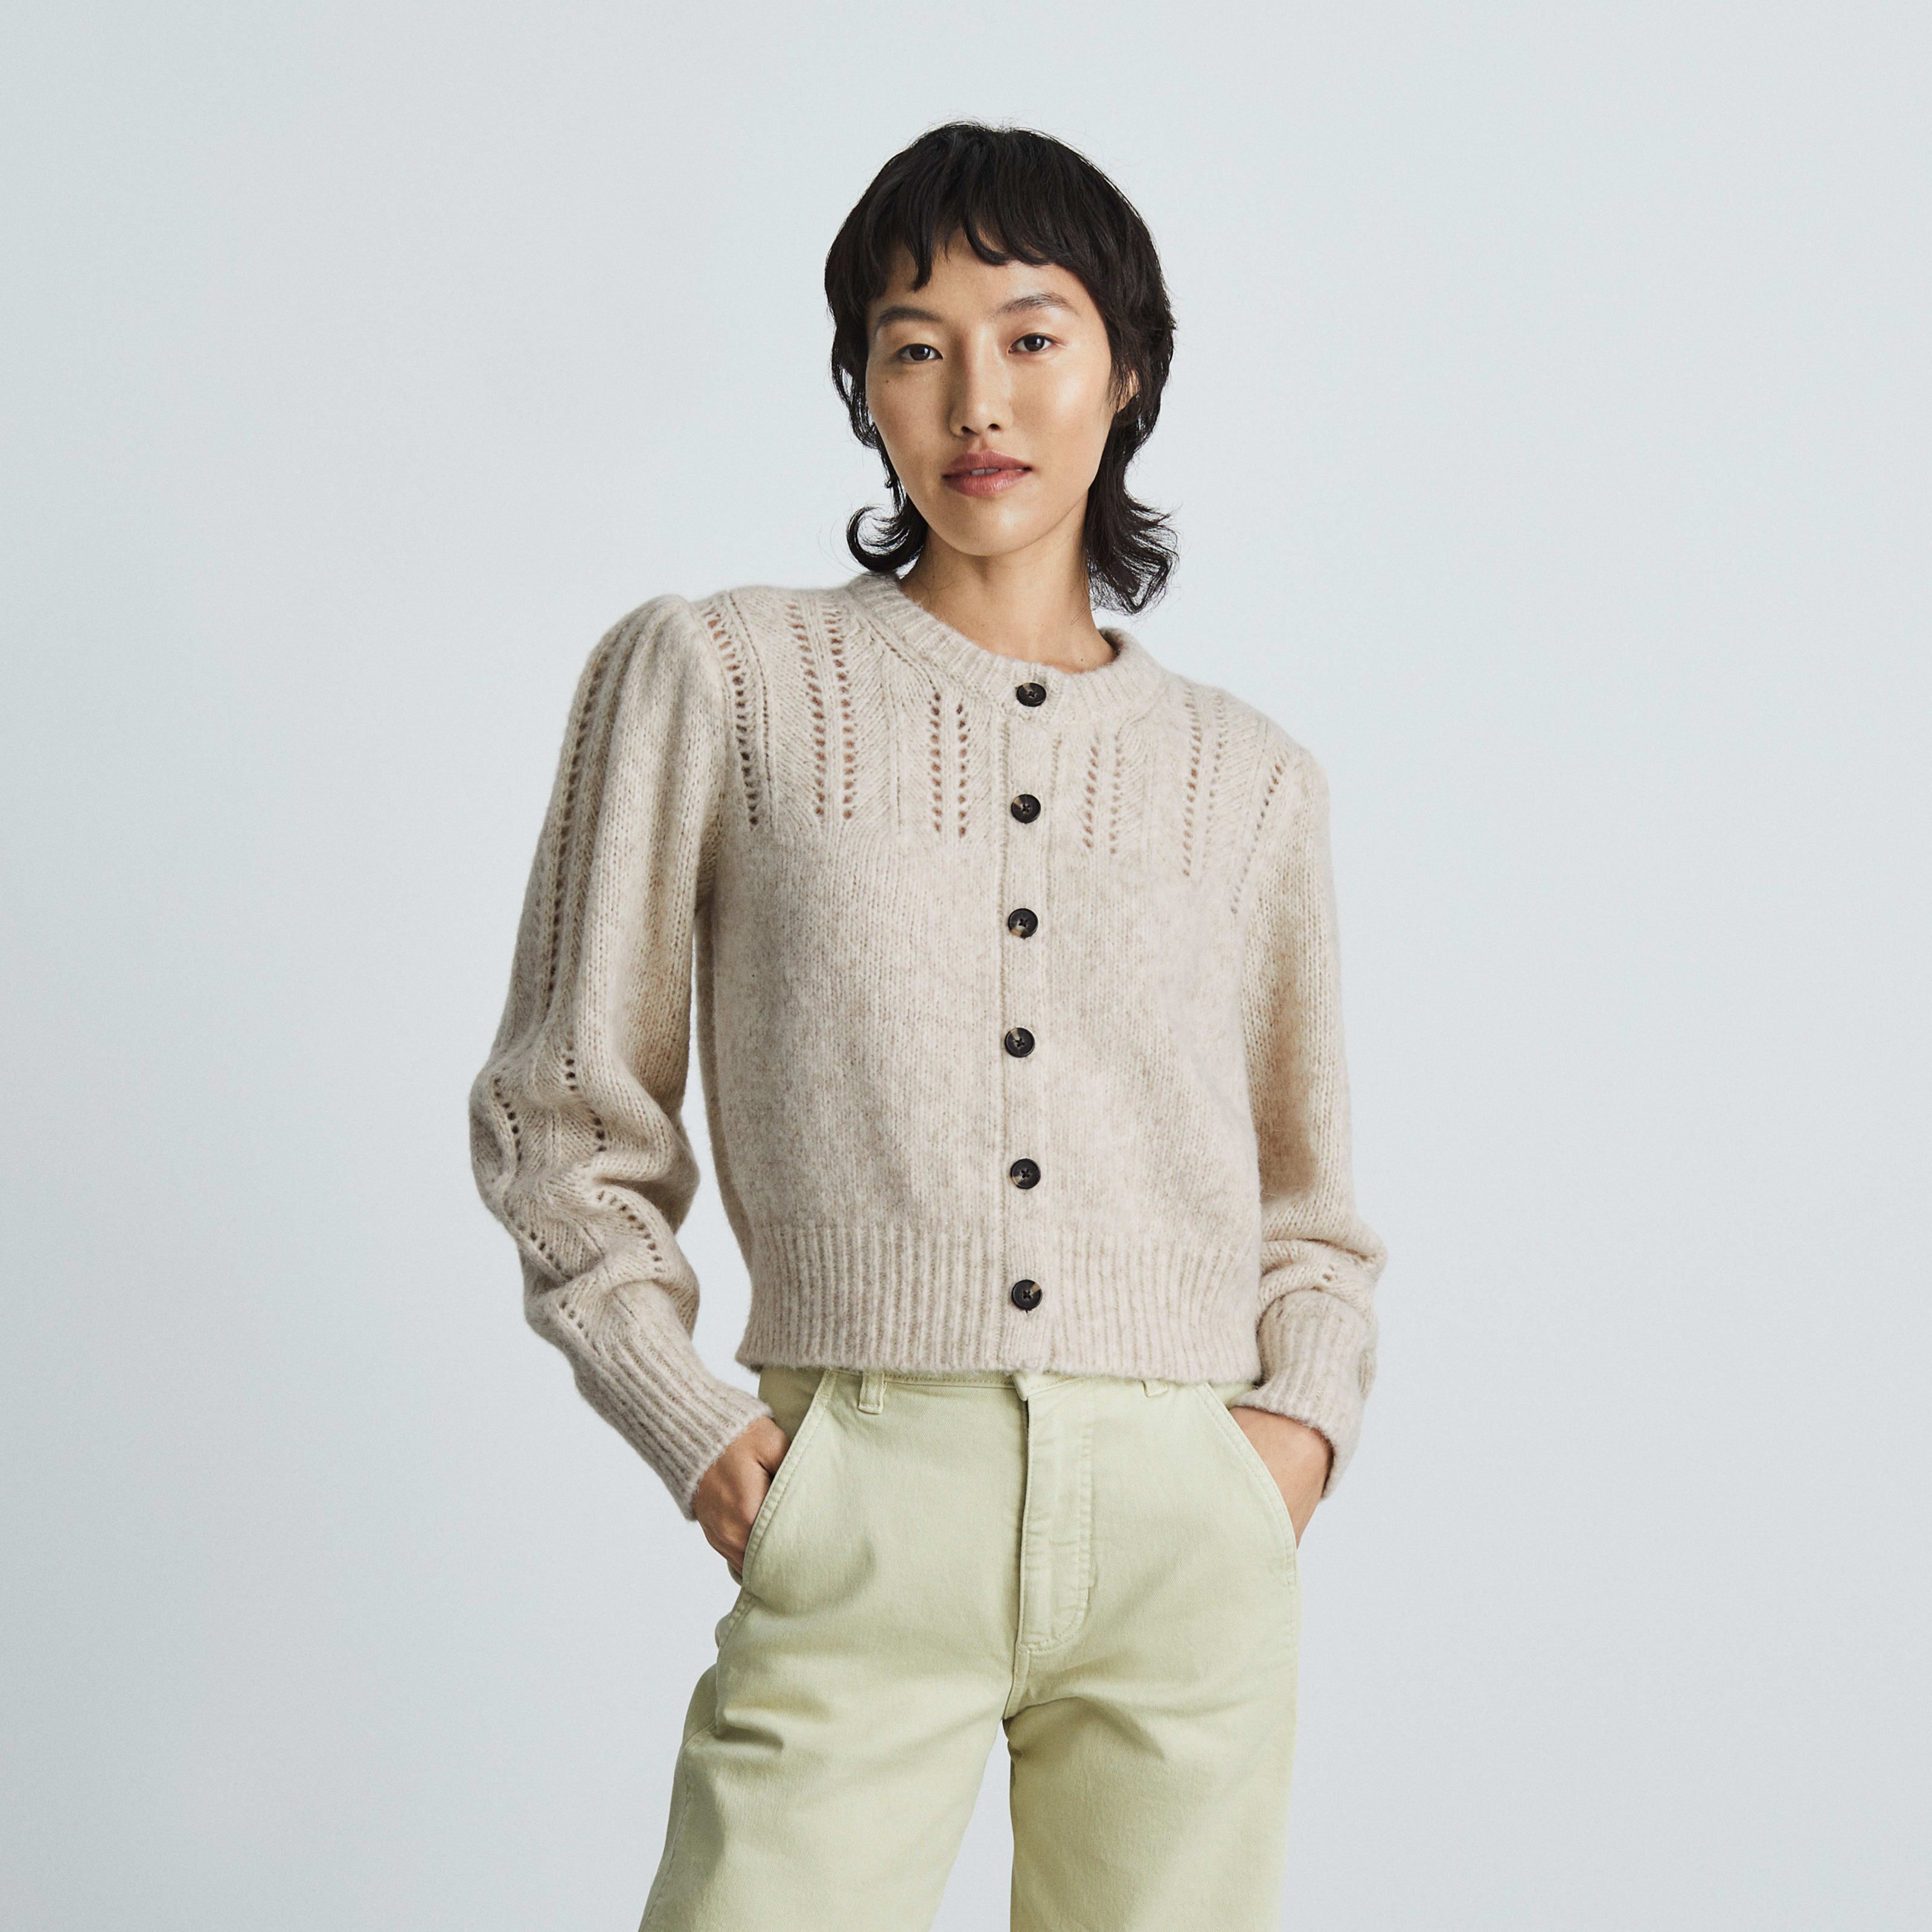 Women's Cloud Cardigan by Everlane in Oatmeal, Size L | Everlane